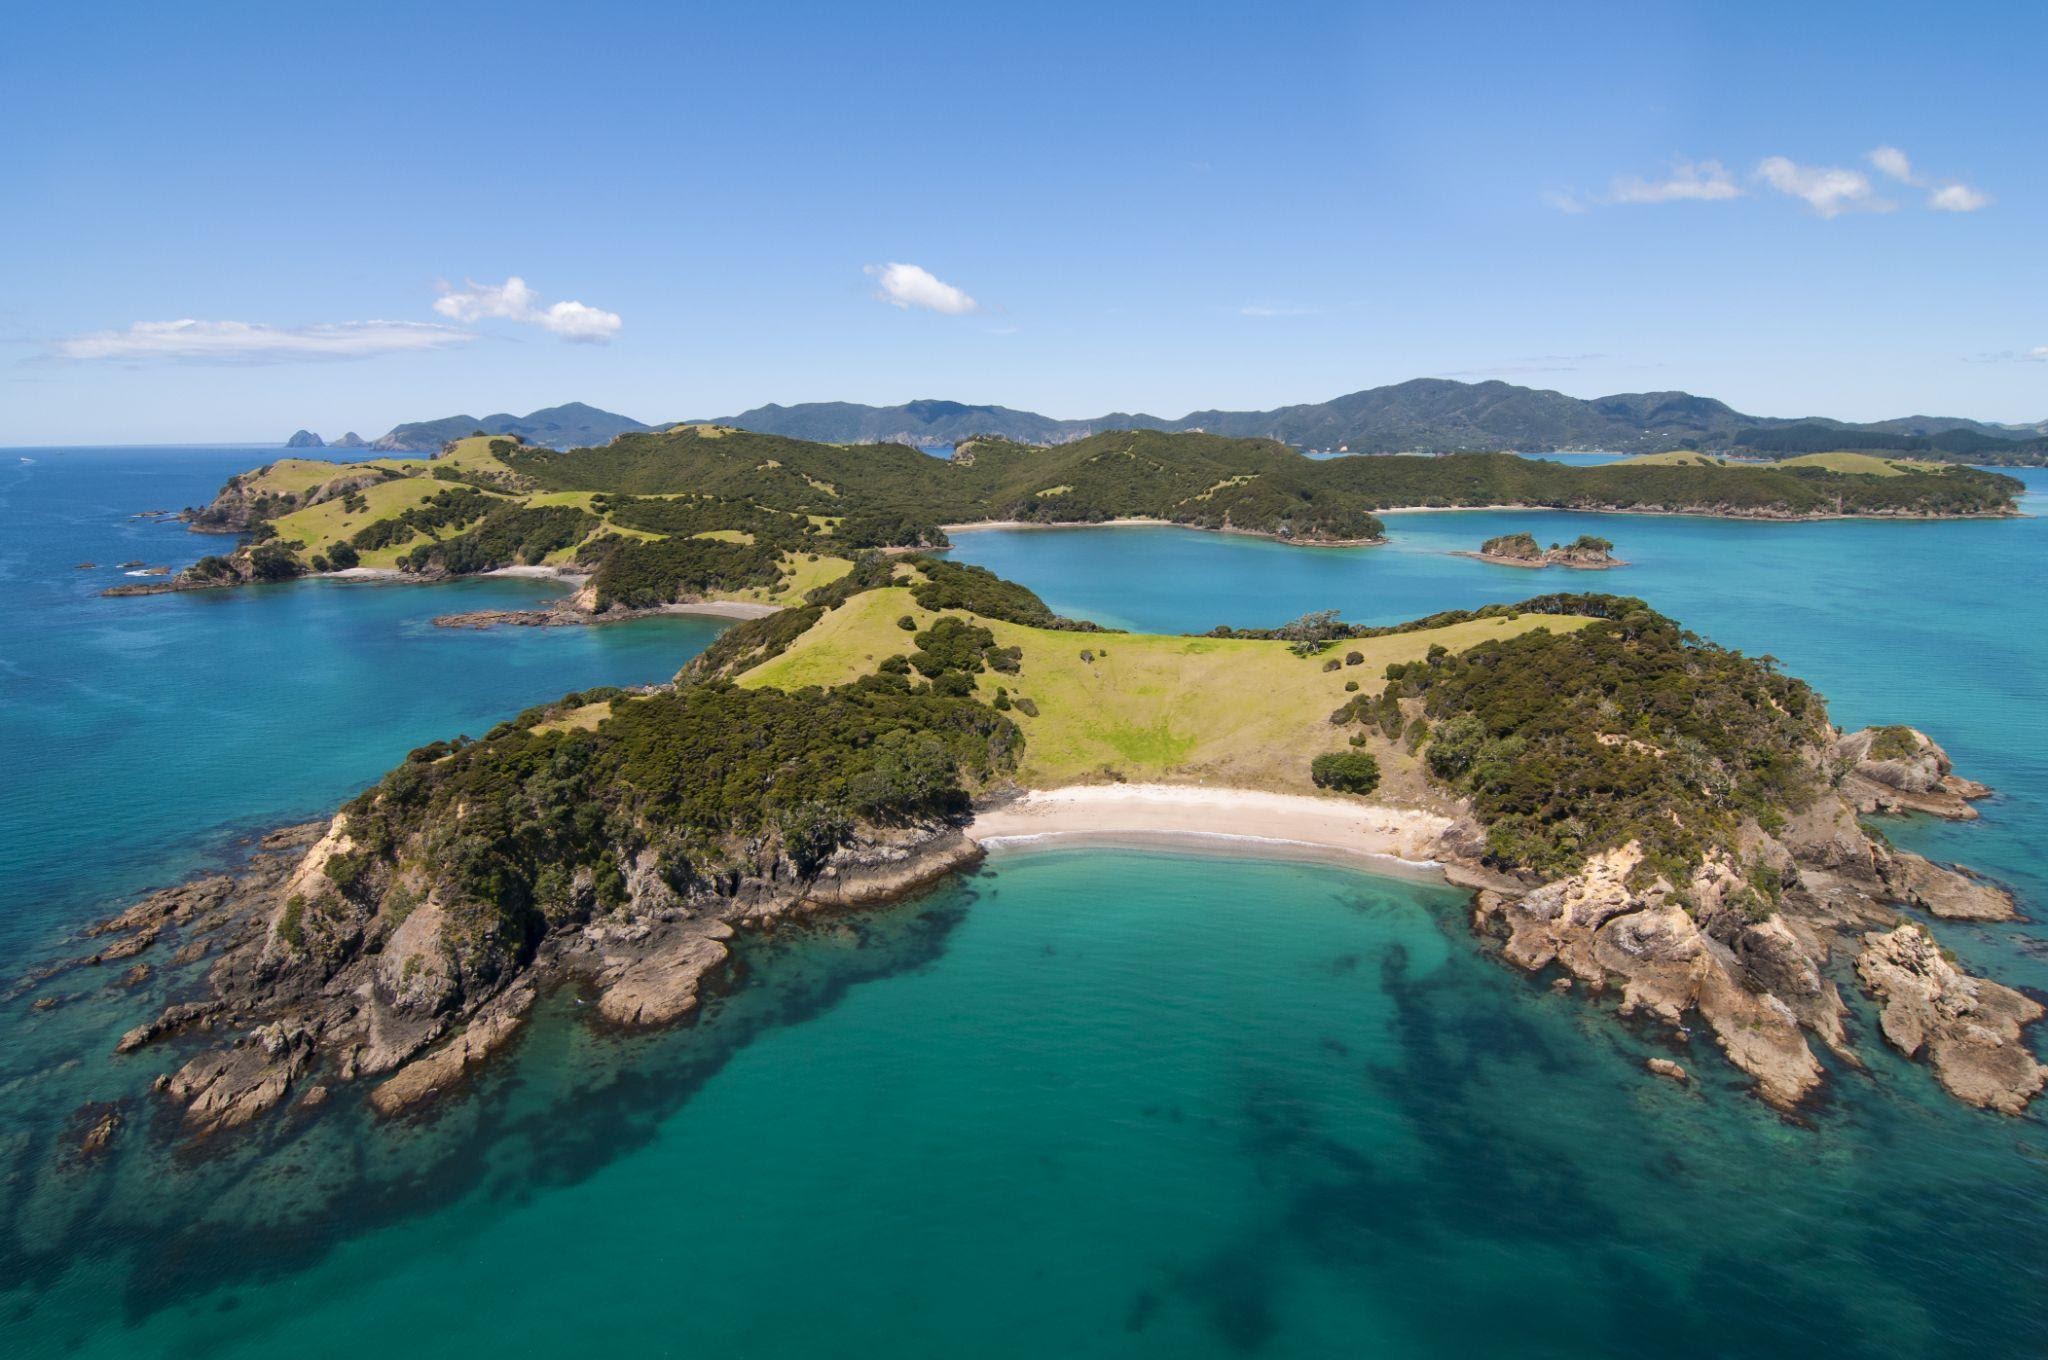 Bay of Islands New Zealand, Sightseeing in new zealand